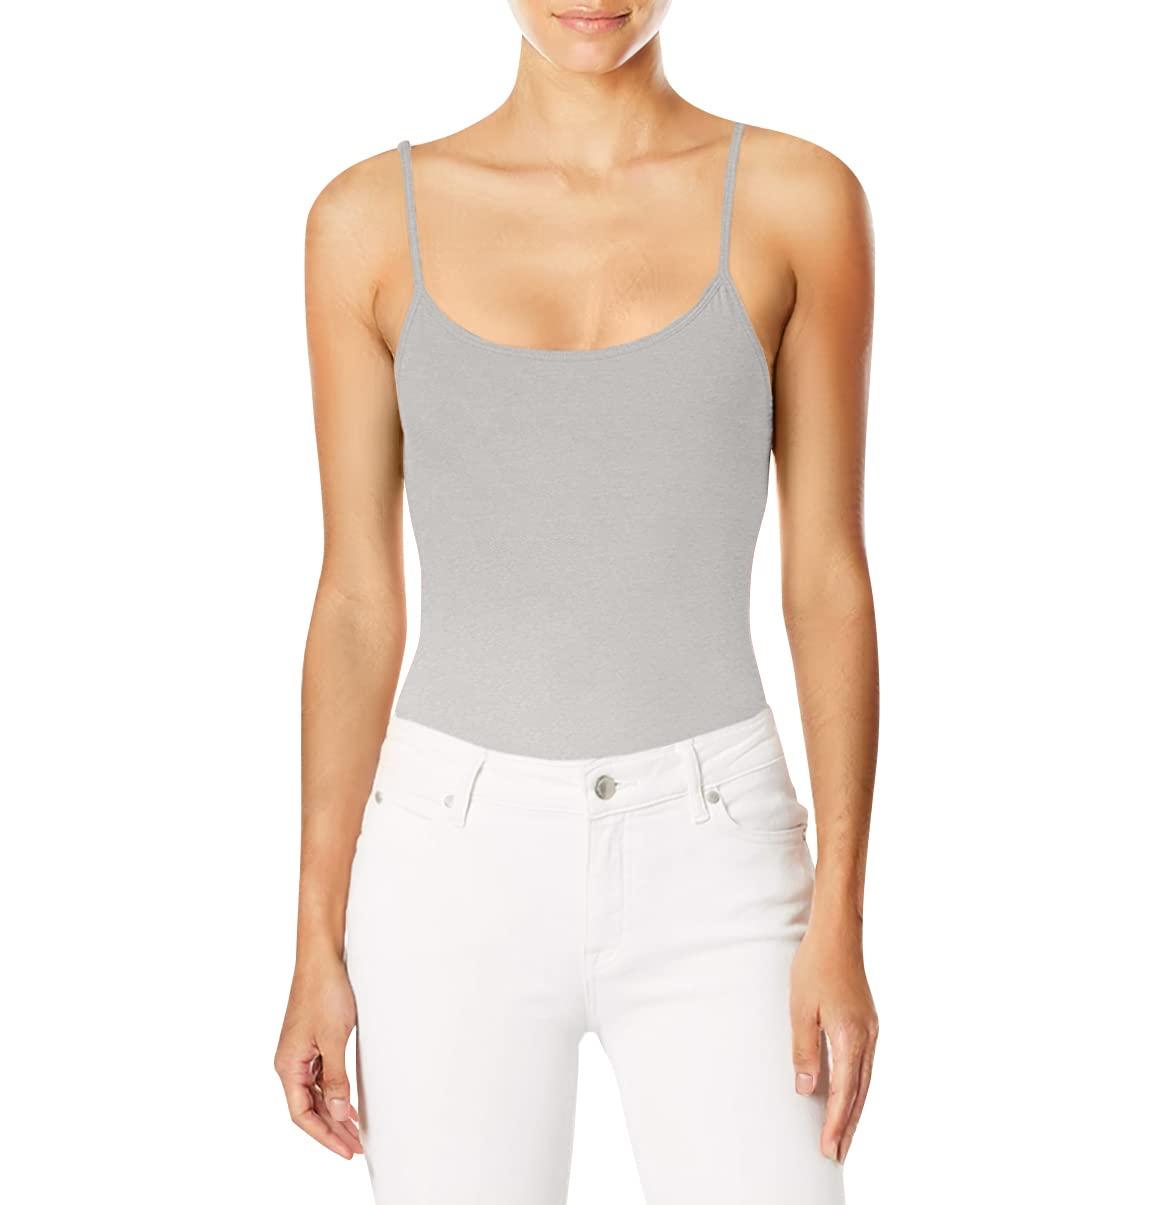 Hanes Stretch Cotton Cami With Built-in Shelf Bra in White